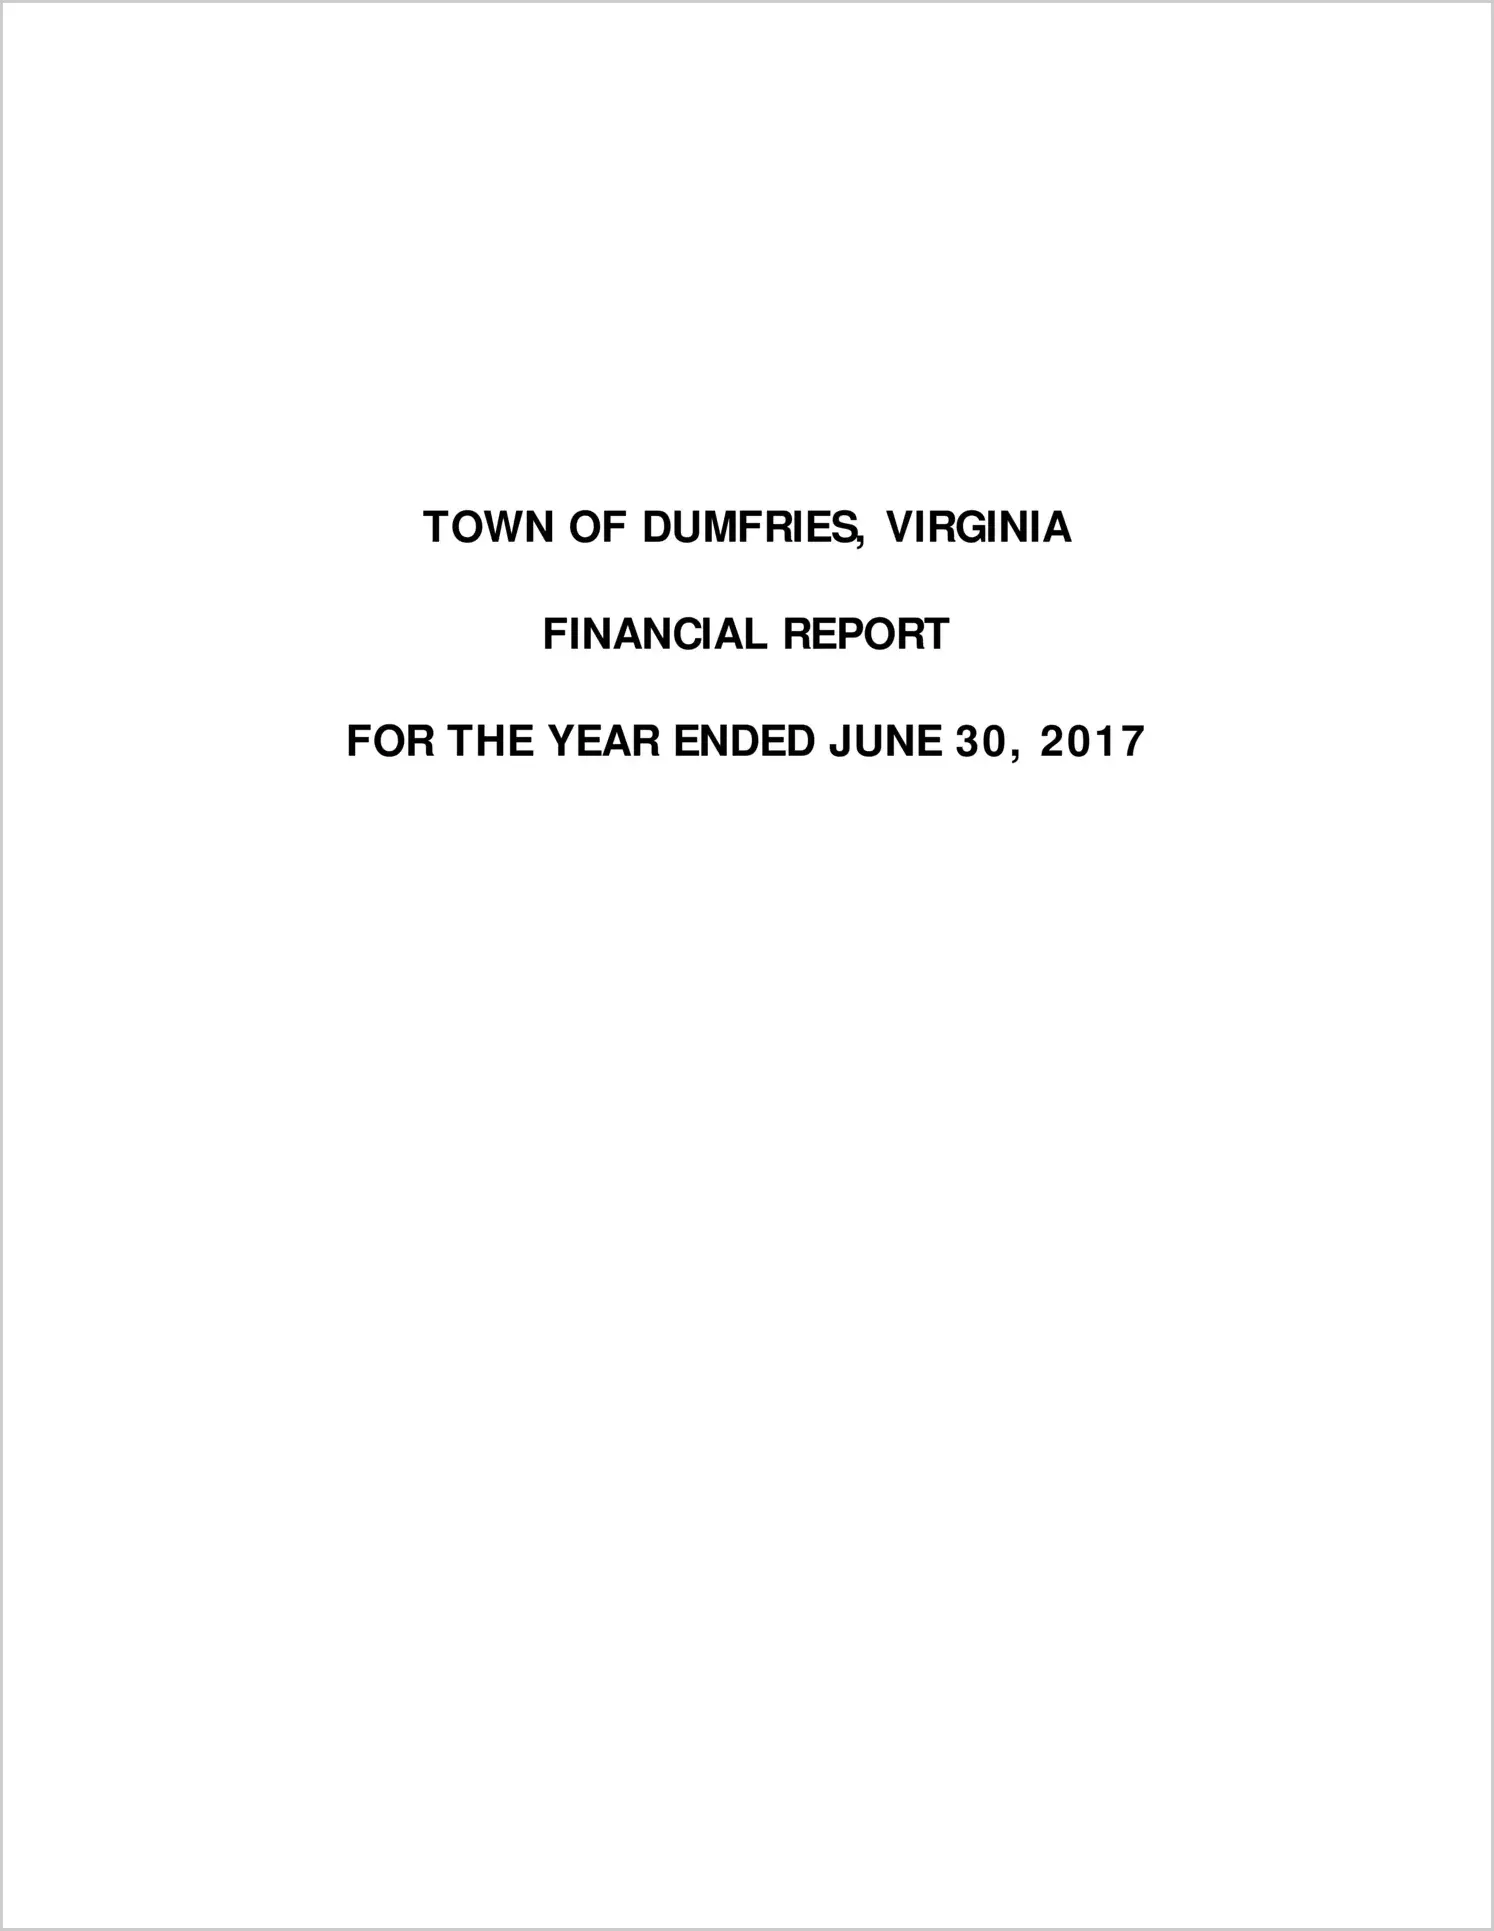 2017 Annual Financial Report for Town of Dumfries